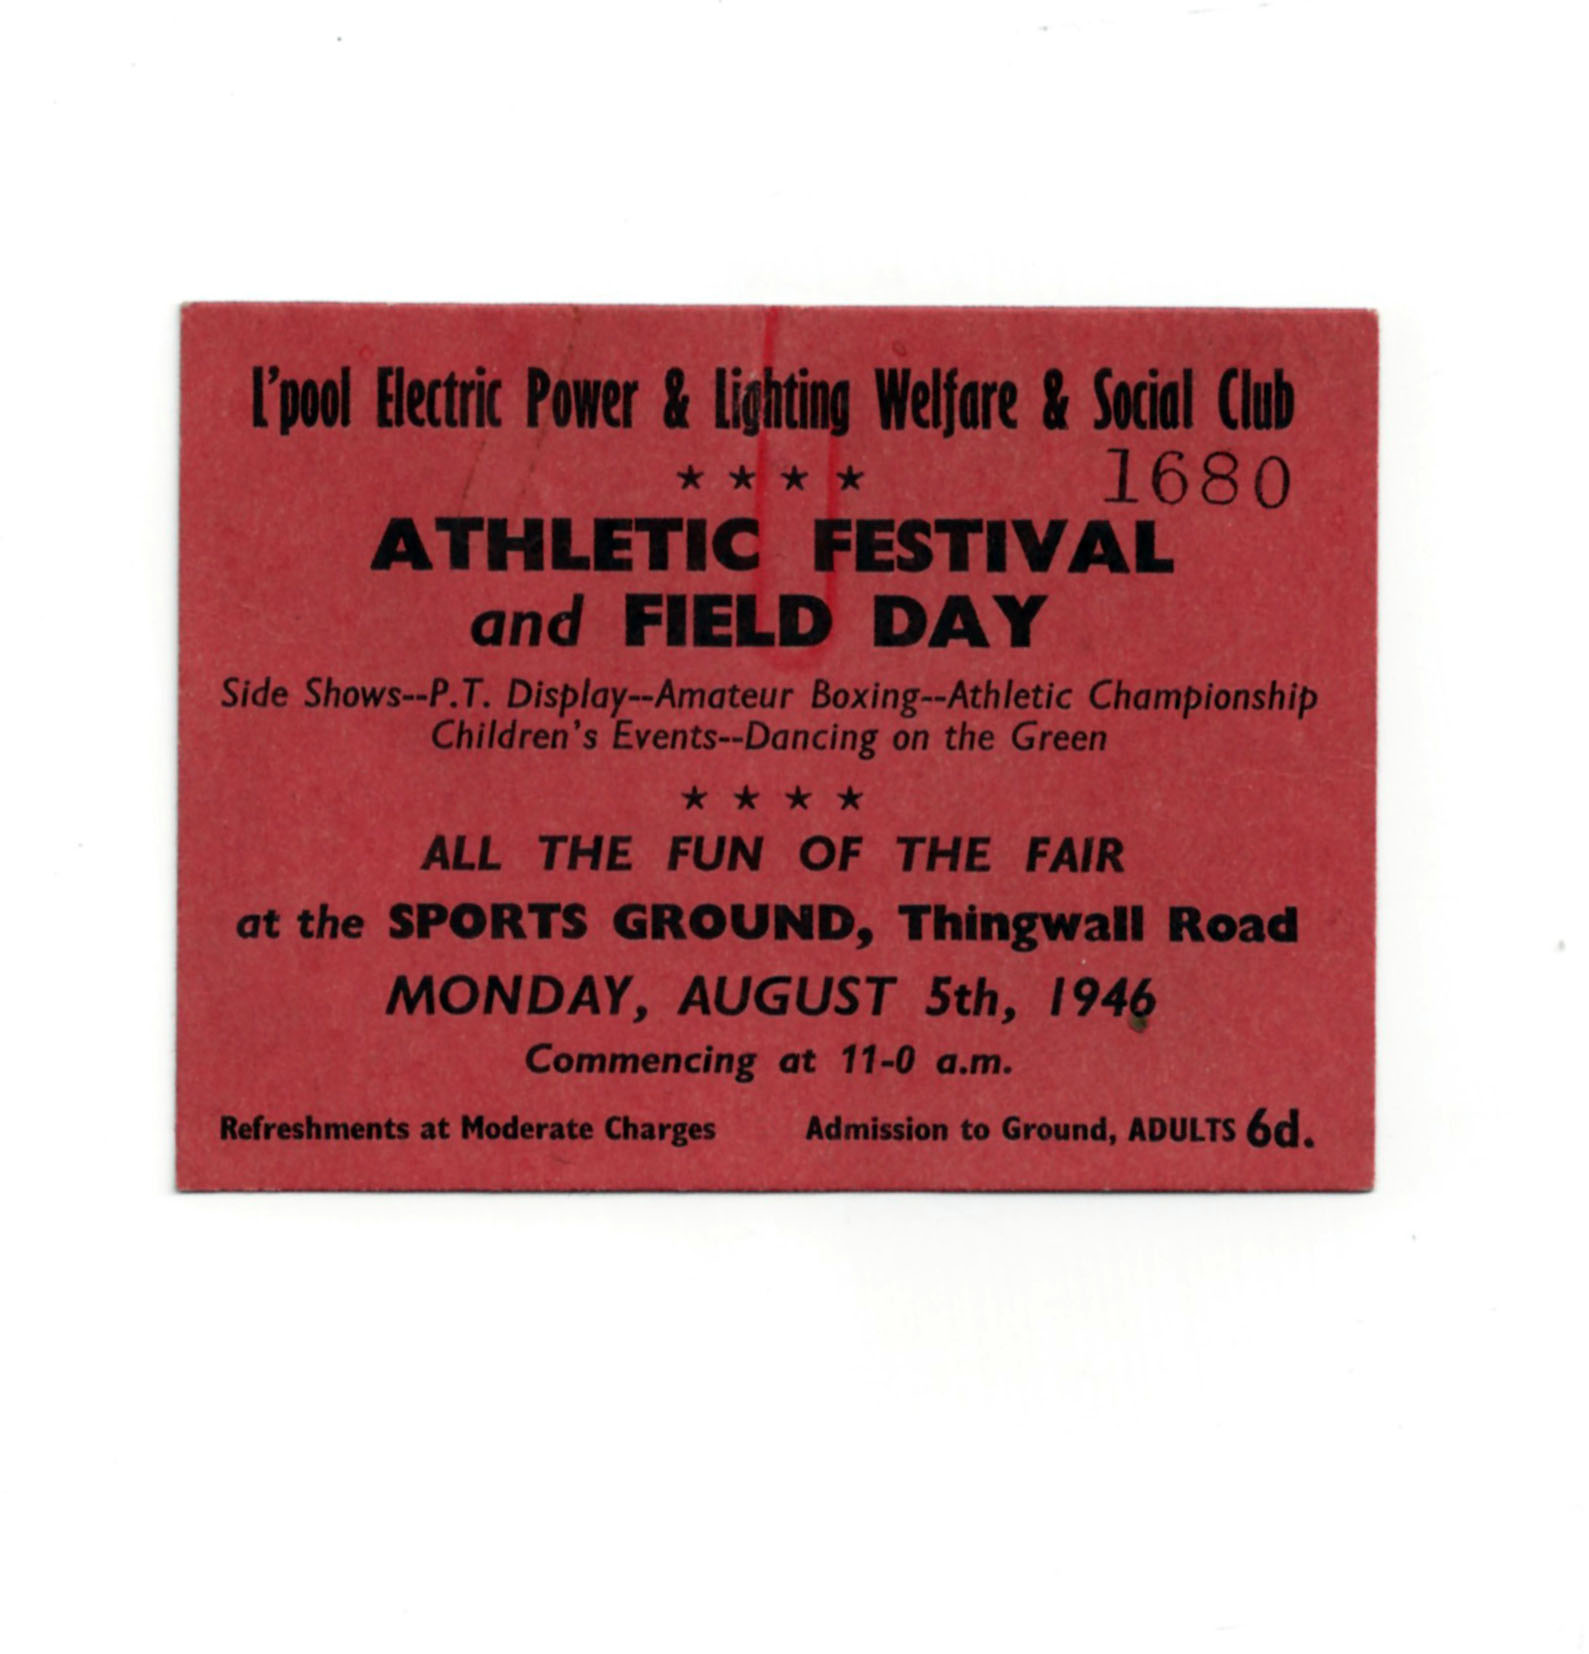 AthleticFestival and Field Day 1946